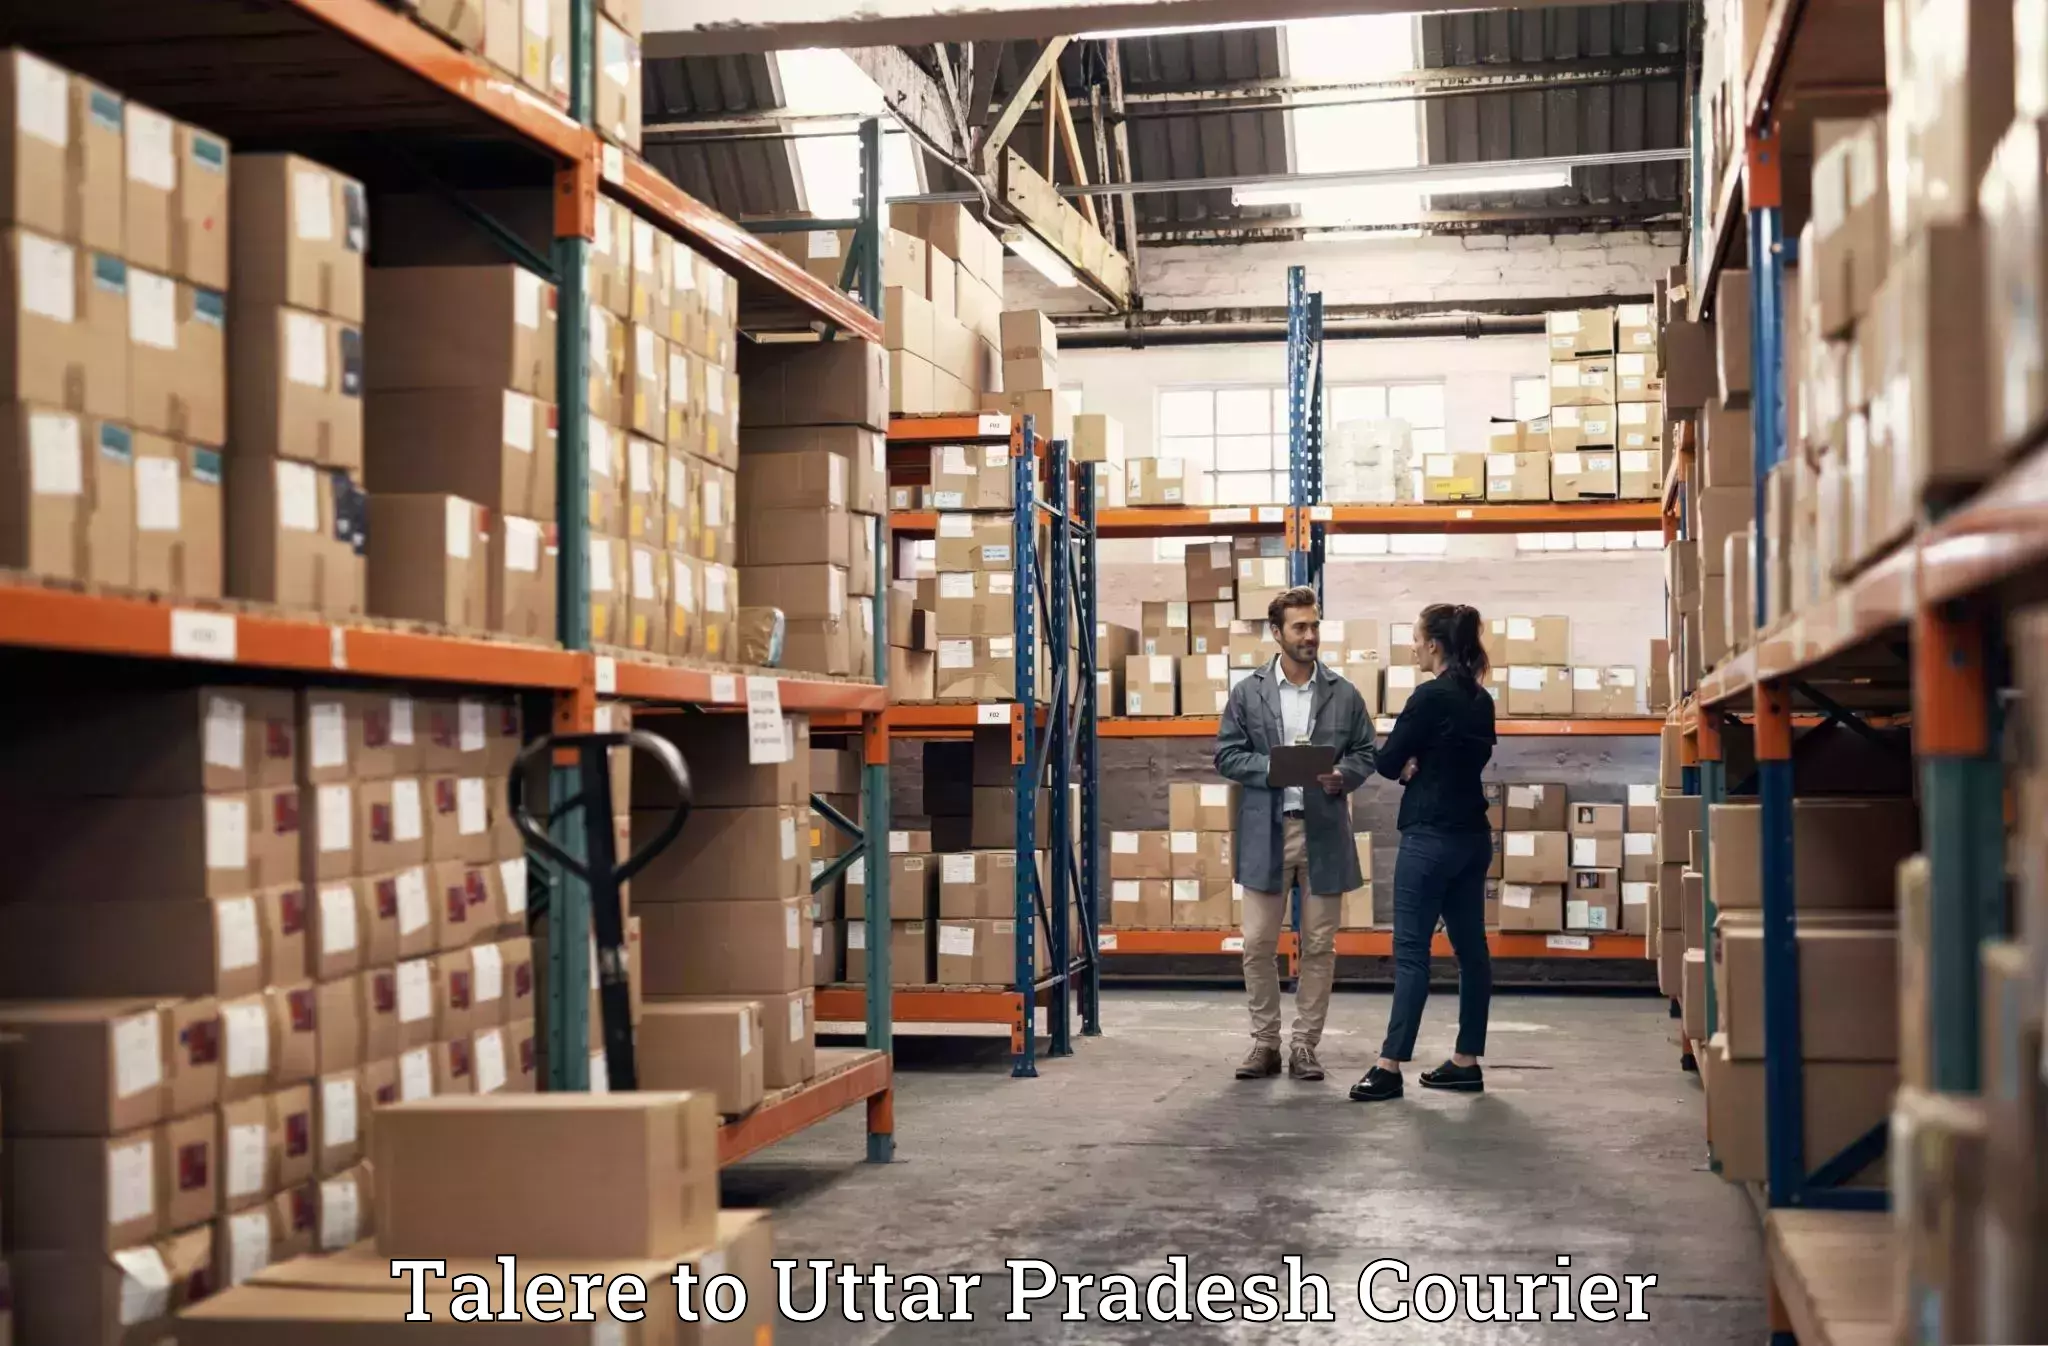 Luggage transport consultancy Talere to Ghaziabad